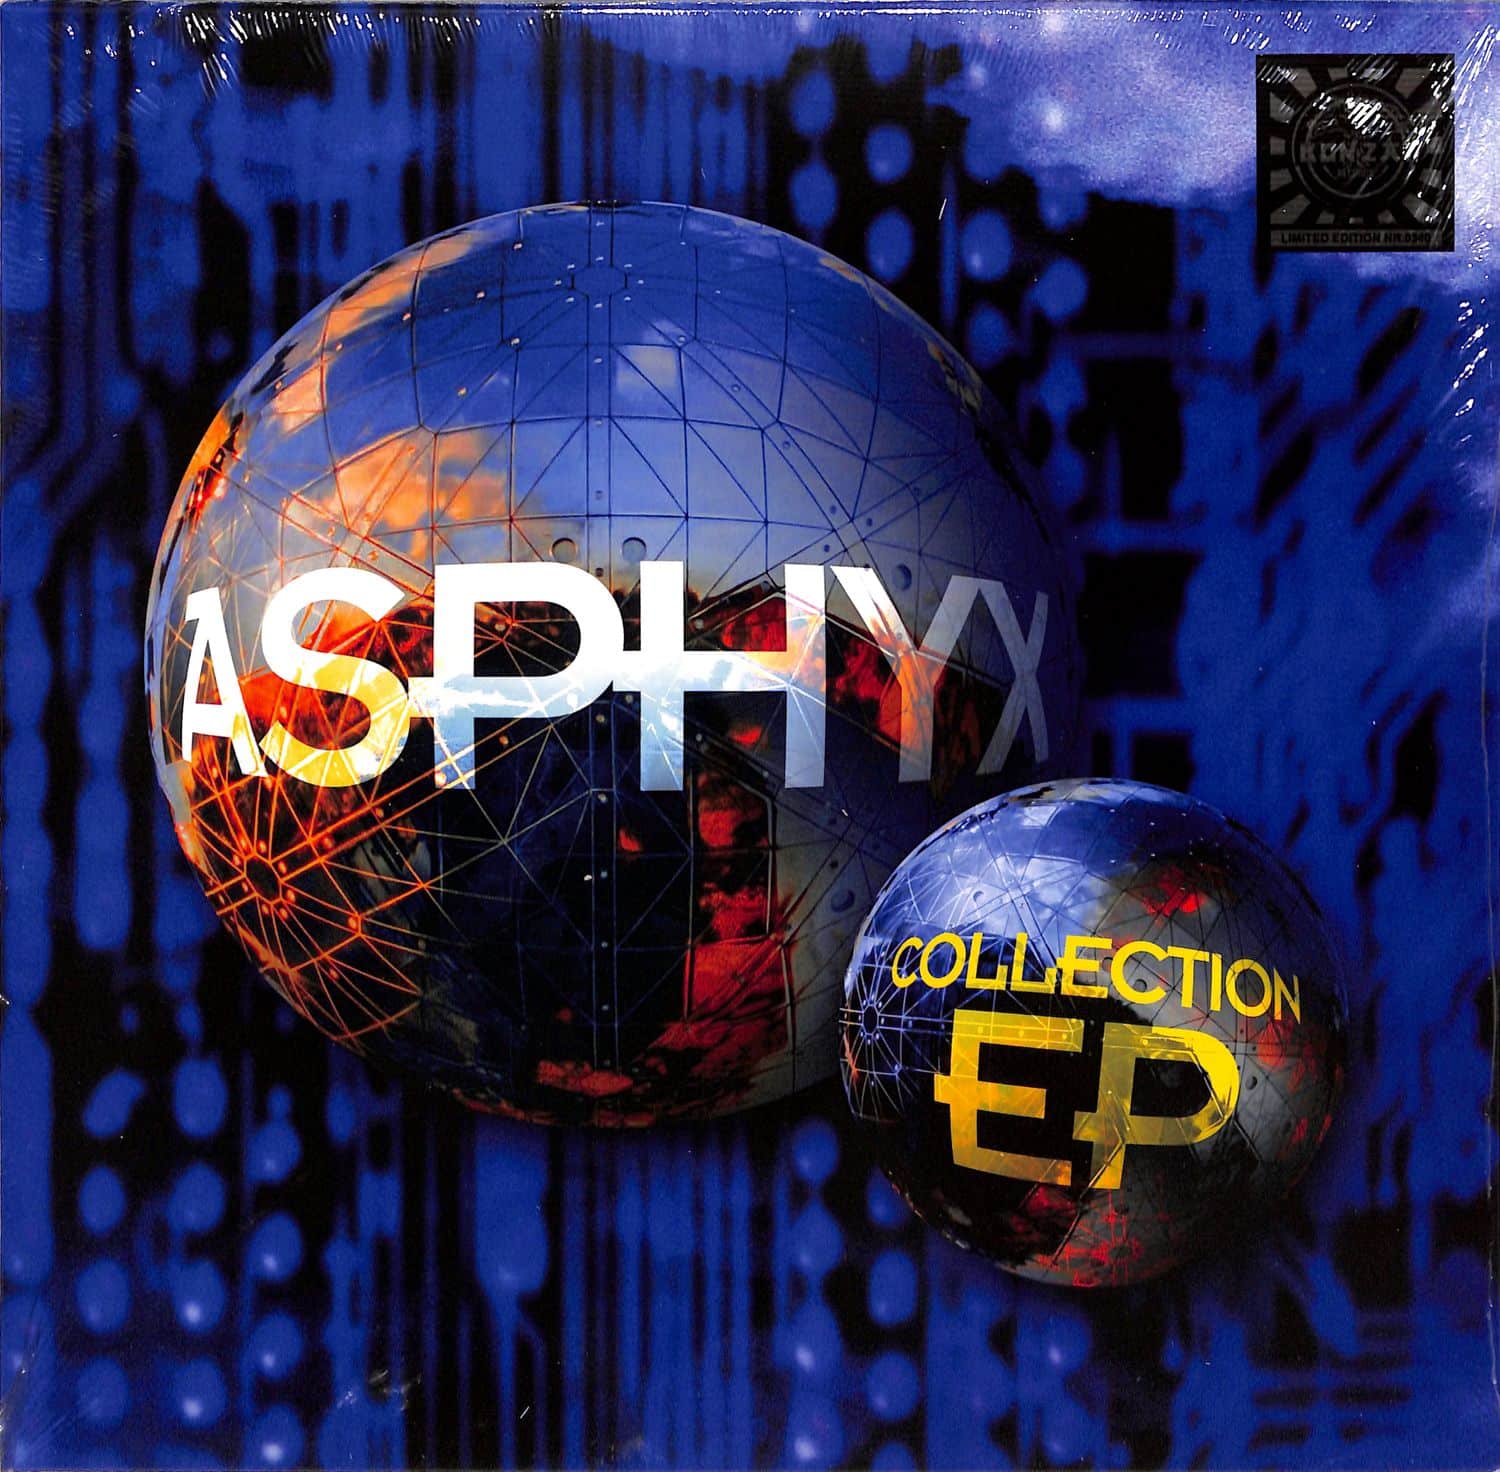 Asphyx - COLLECTION EP 